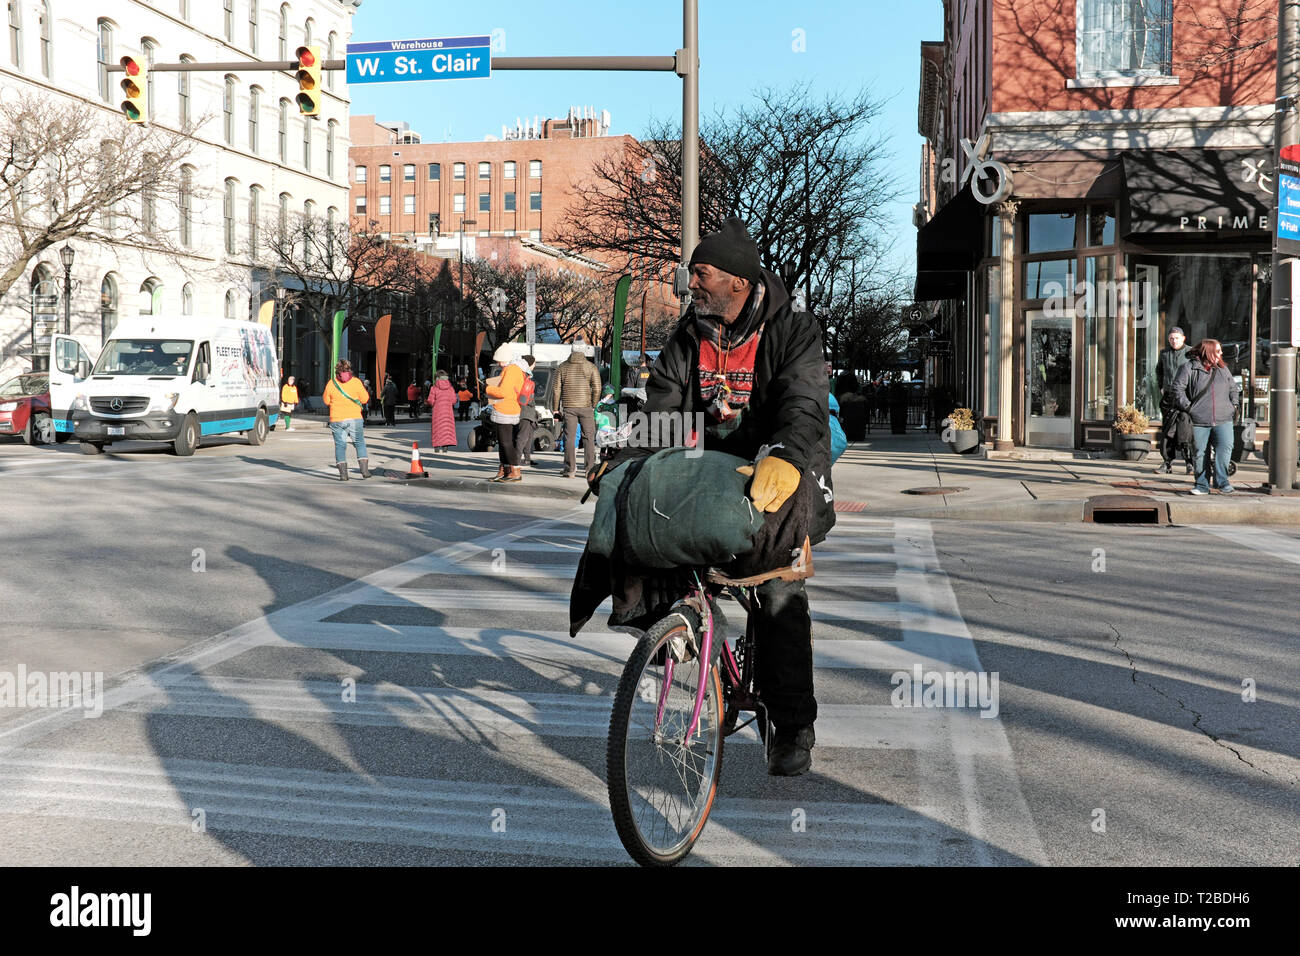 Black man on bicycle with belongings crosses at a crosswalk in the trendy Warehouse District neighborhood in downtown Cleveland, Ohio, USA. Stock Photo